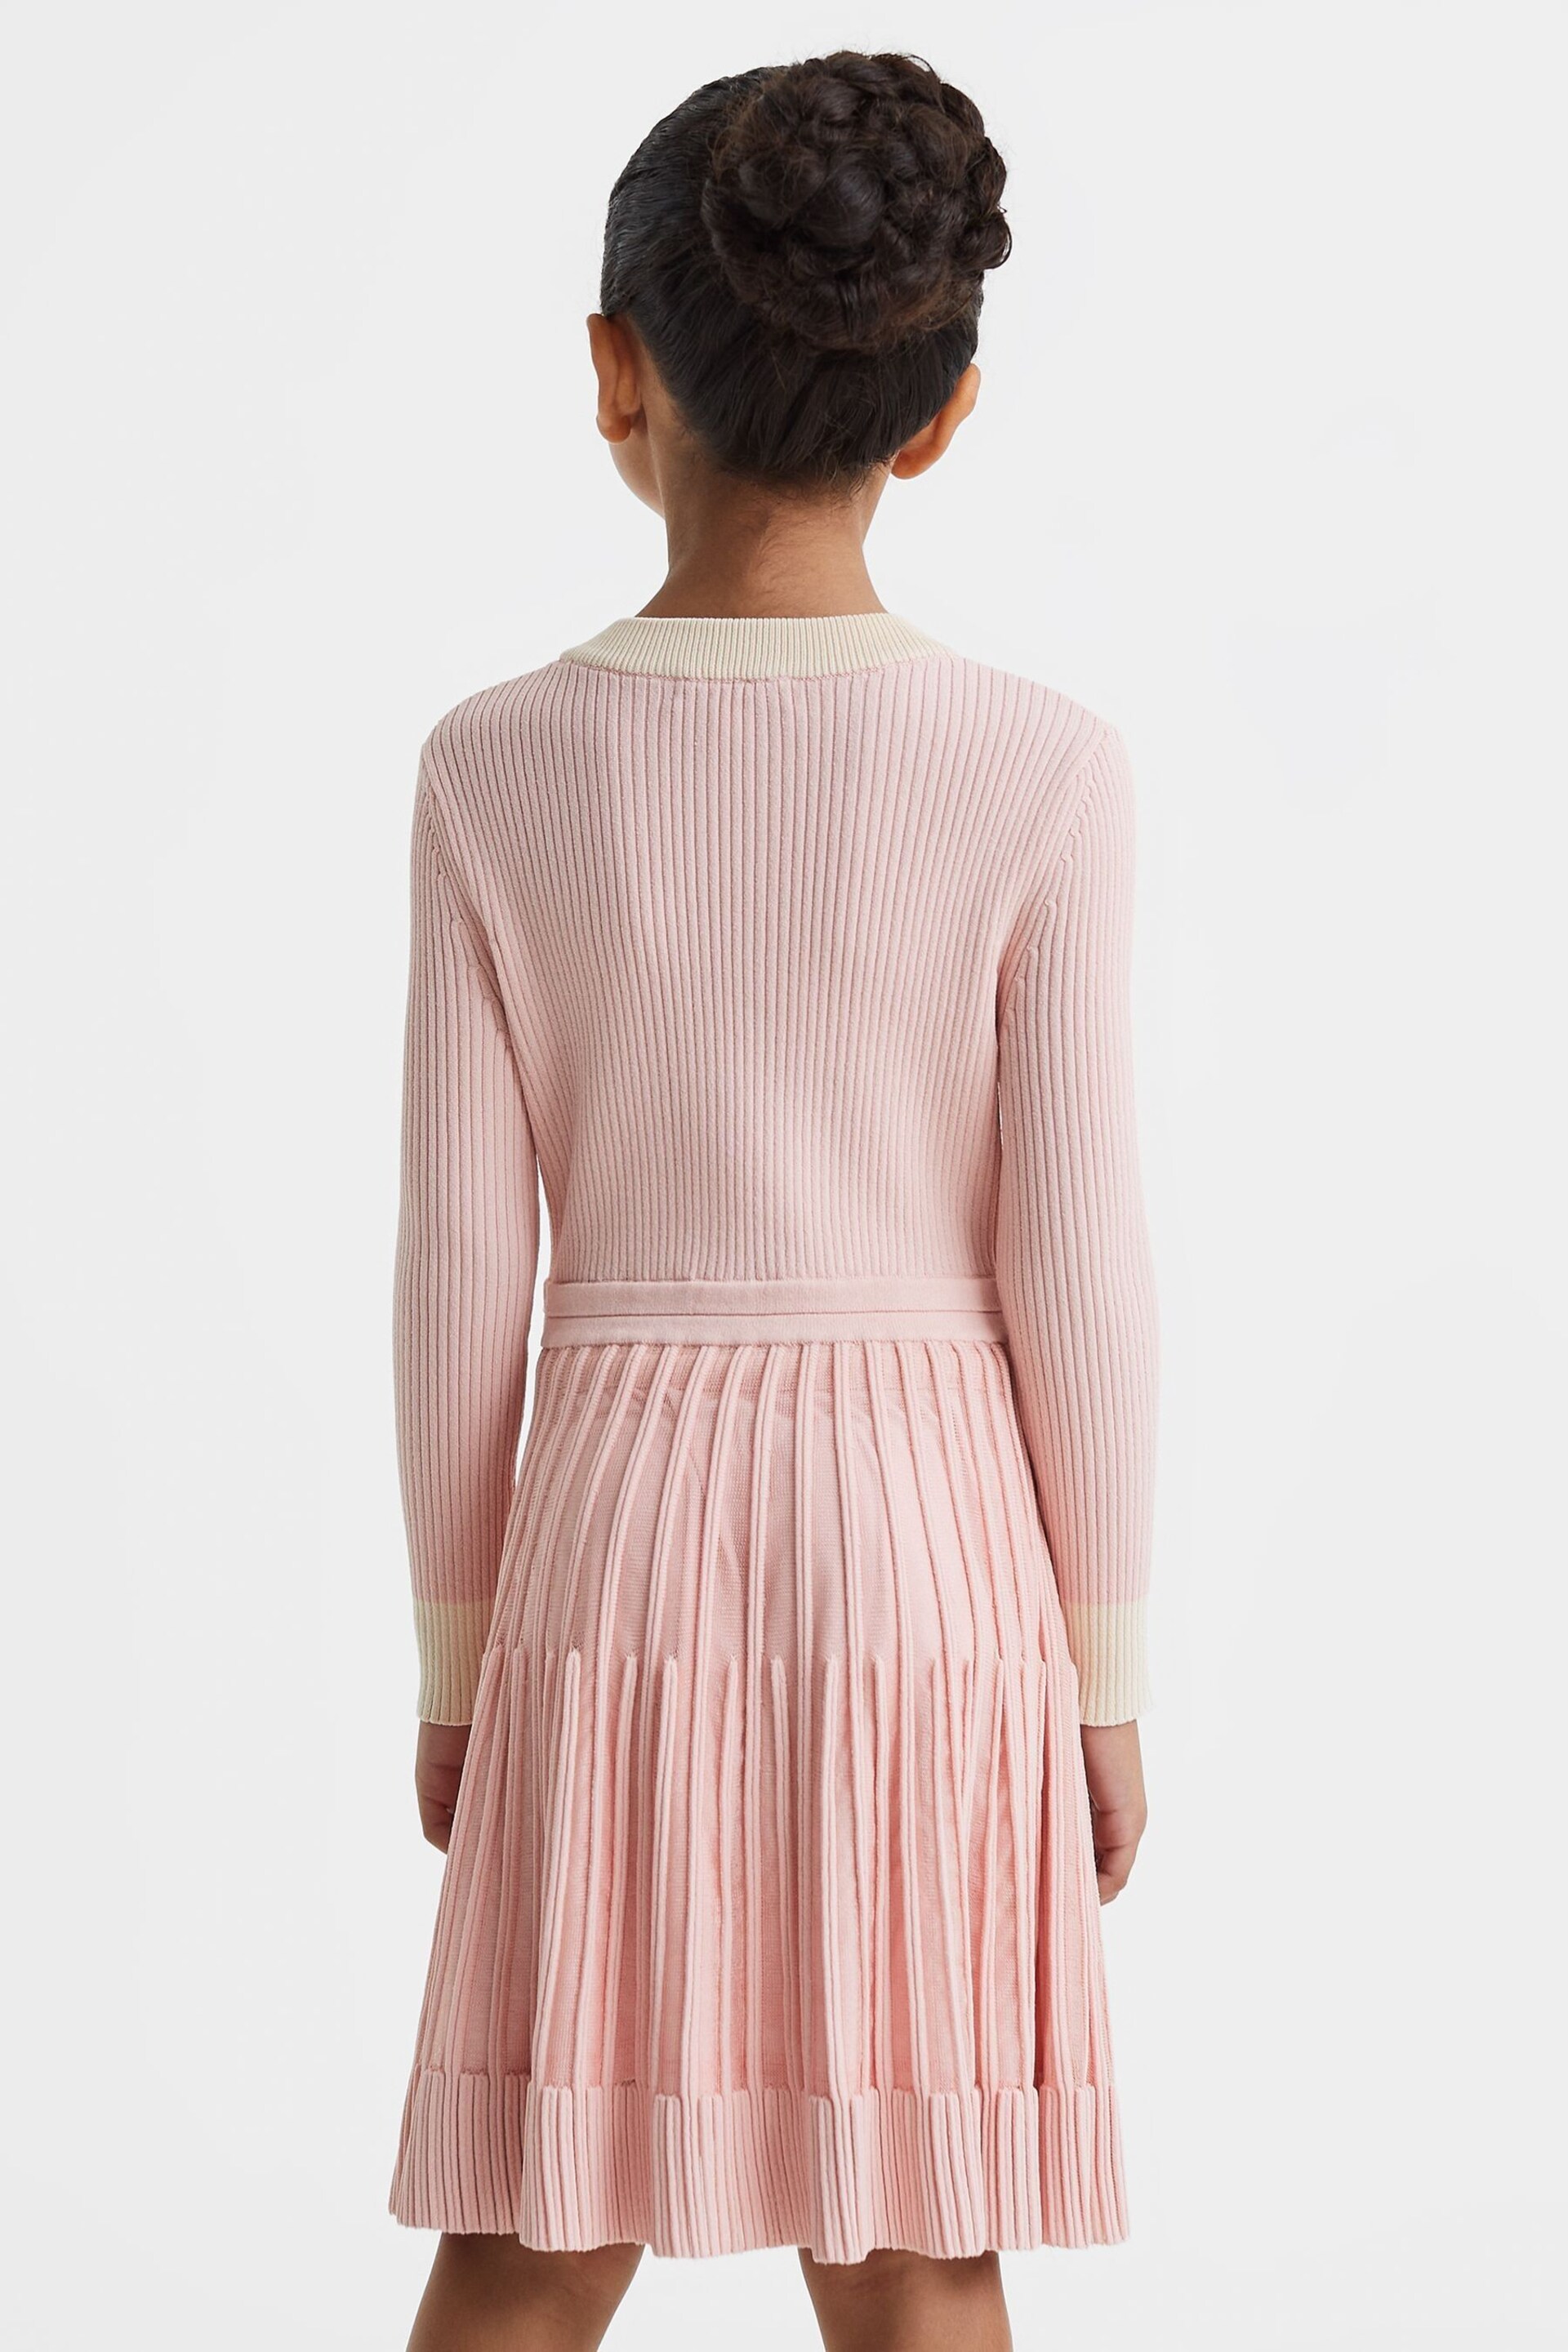 Reiss Pink Teagan Teen Ribbed Fit-and-Flare Dress - Image 5 of 6